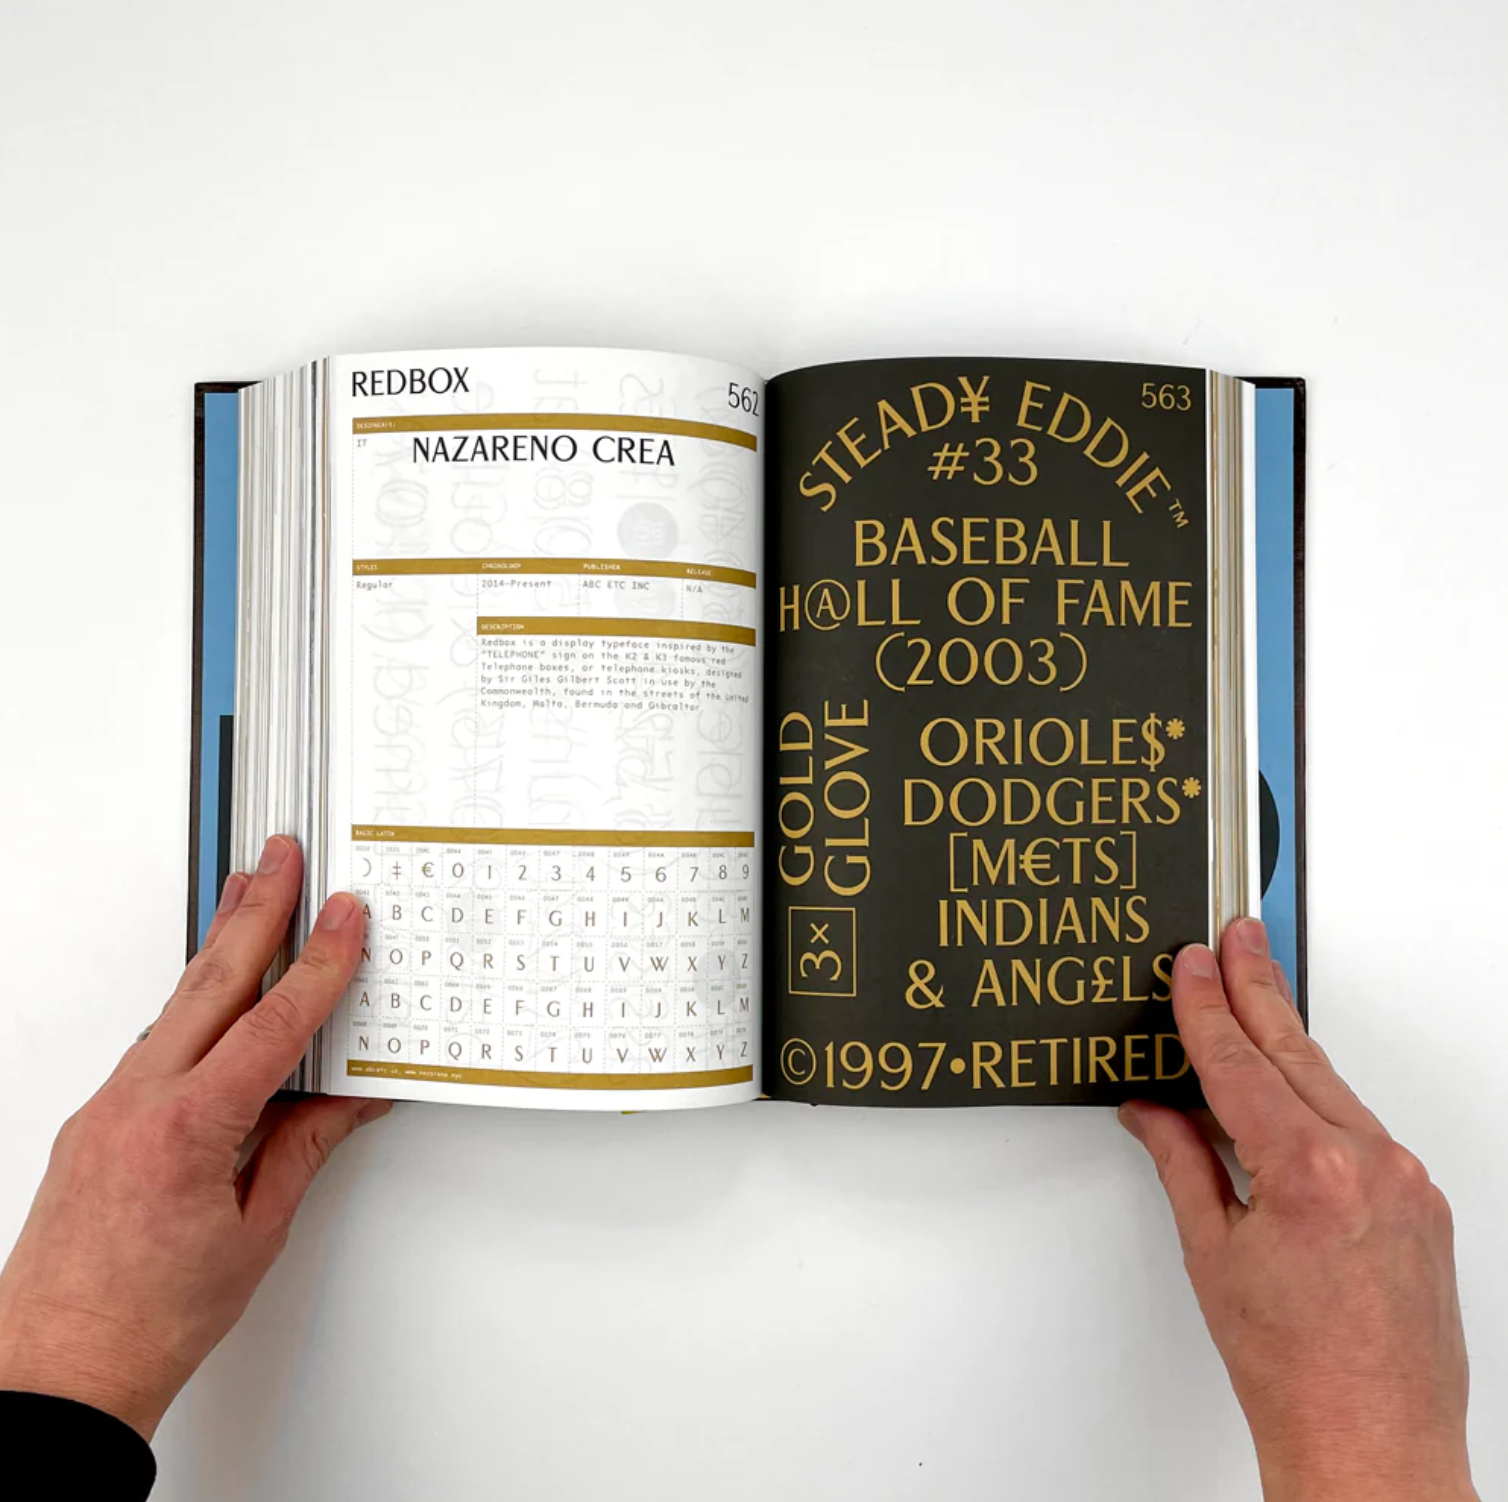 SHOPLIFTERS, ISSUE 10 – NEW TYPE DESIGN VOLUME 2